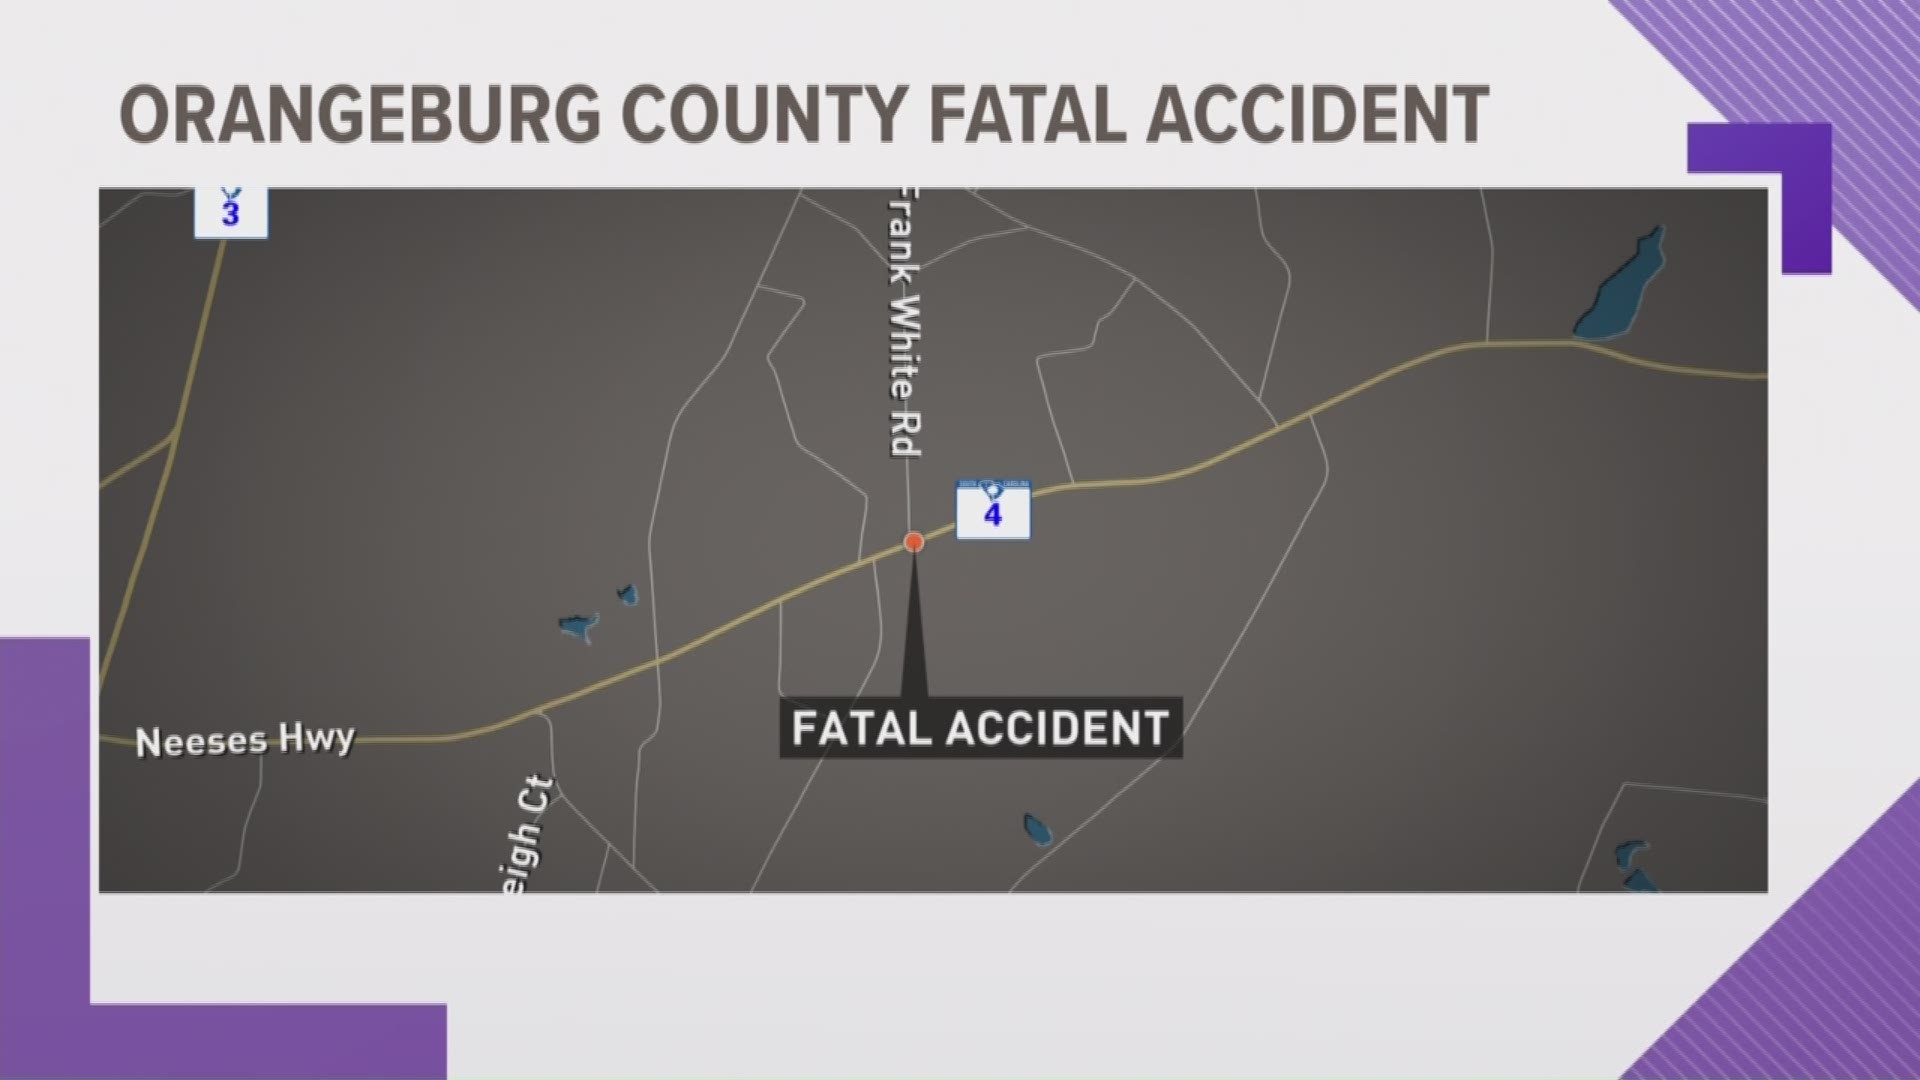 One person is dead after a single car accident in Orangeburg County Sunday morning.